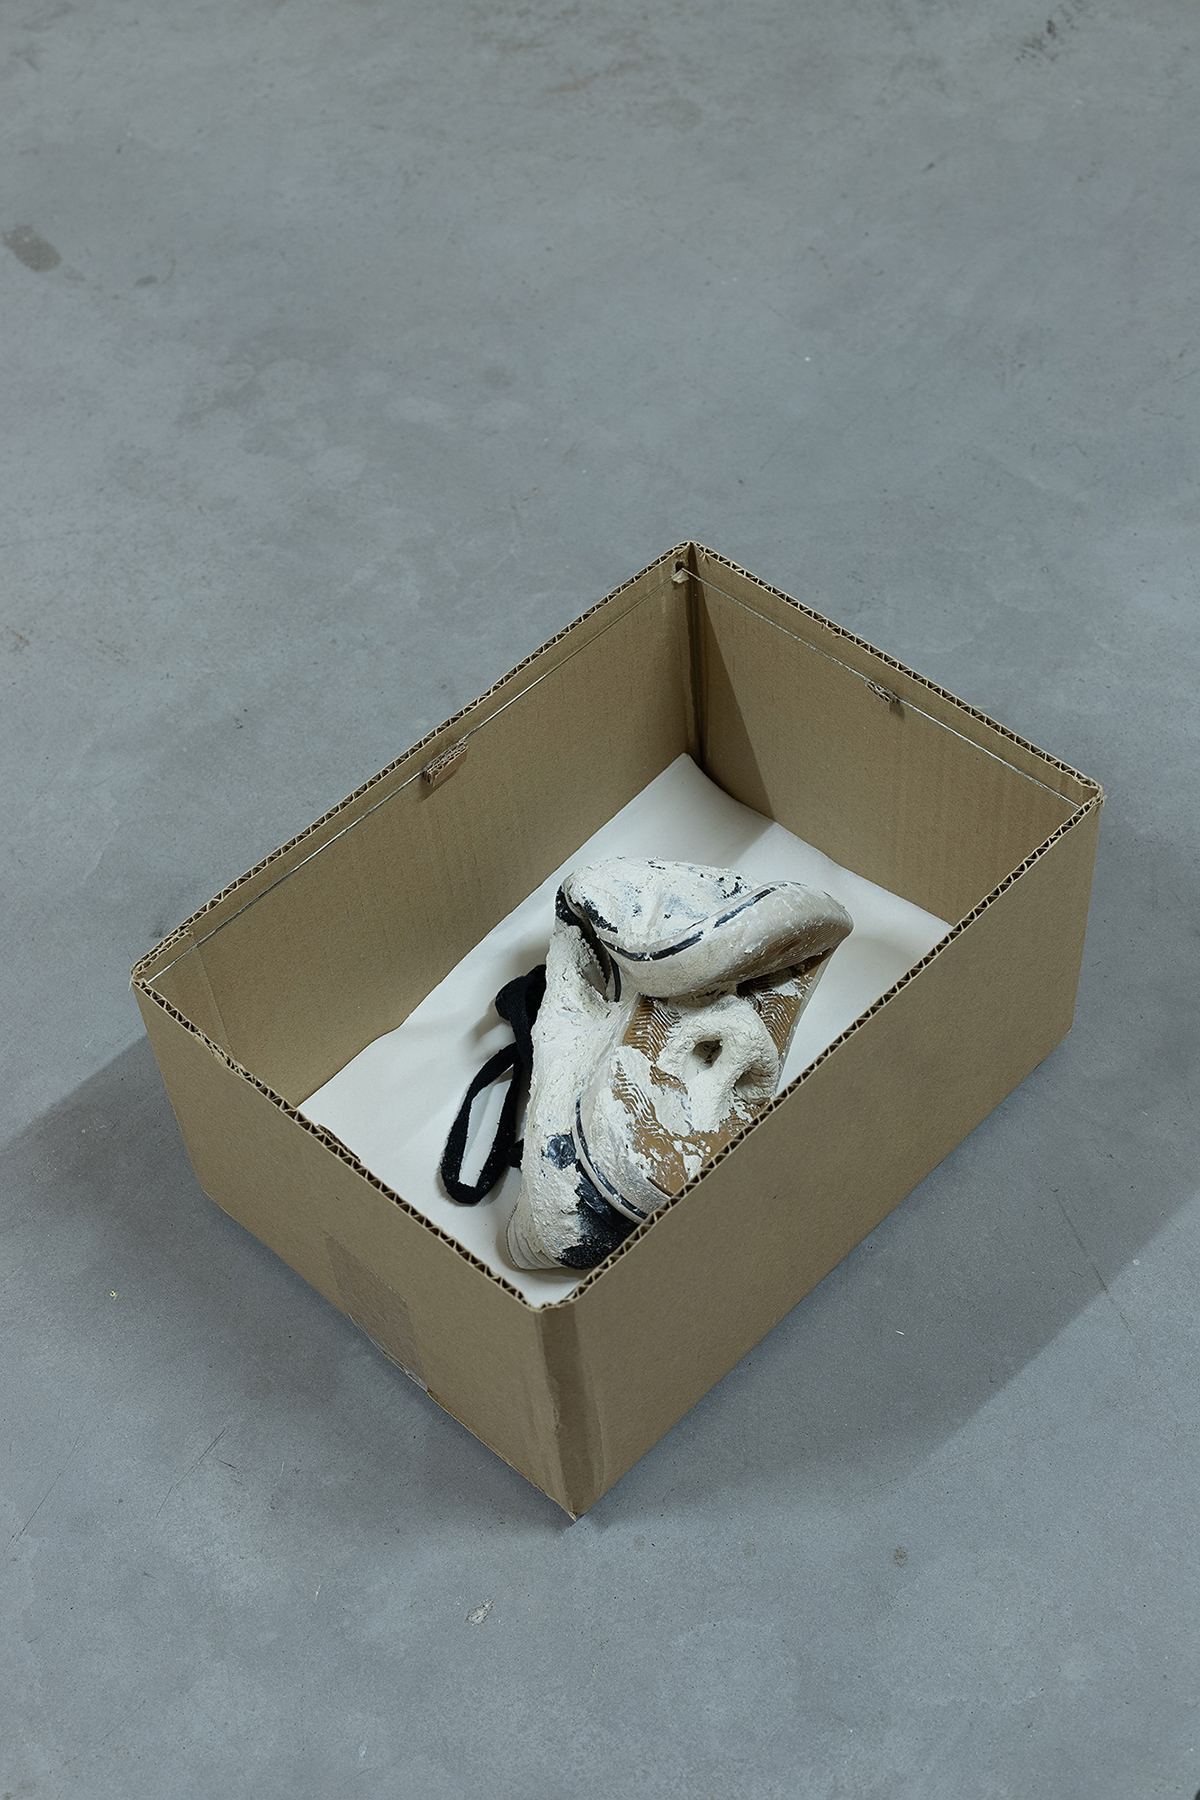 Ian Waelder. A Nose Is A Nose Is A Nose (Injured Bird, The Streets Are Still The Same), 2023. Used sneaker, papier-mache, tissue paper, cardboard box and sheet of anti-reflective glass. 31,5 x 23,5 x 15 cm